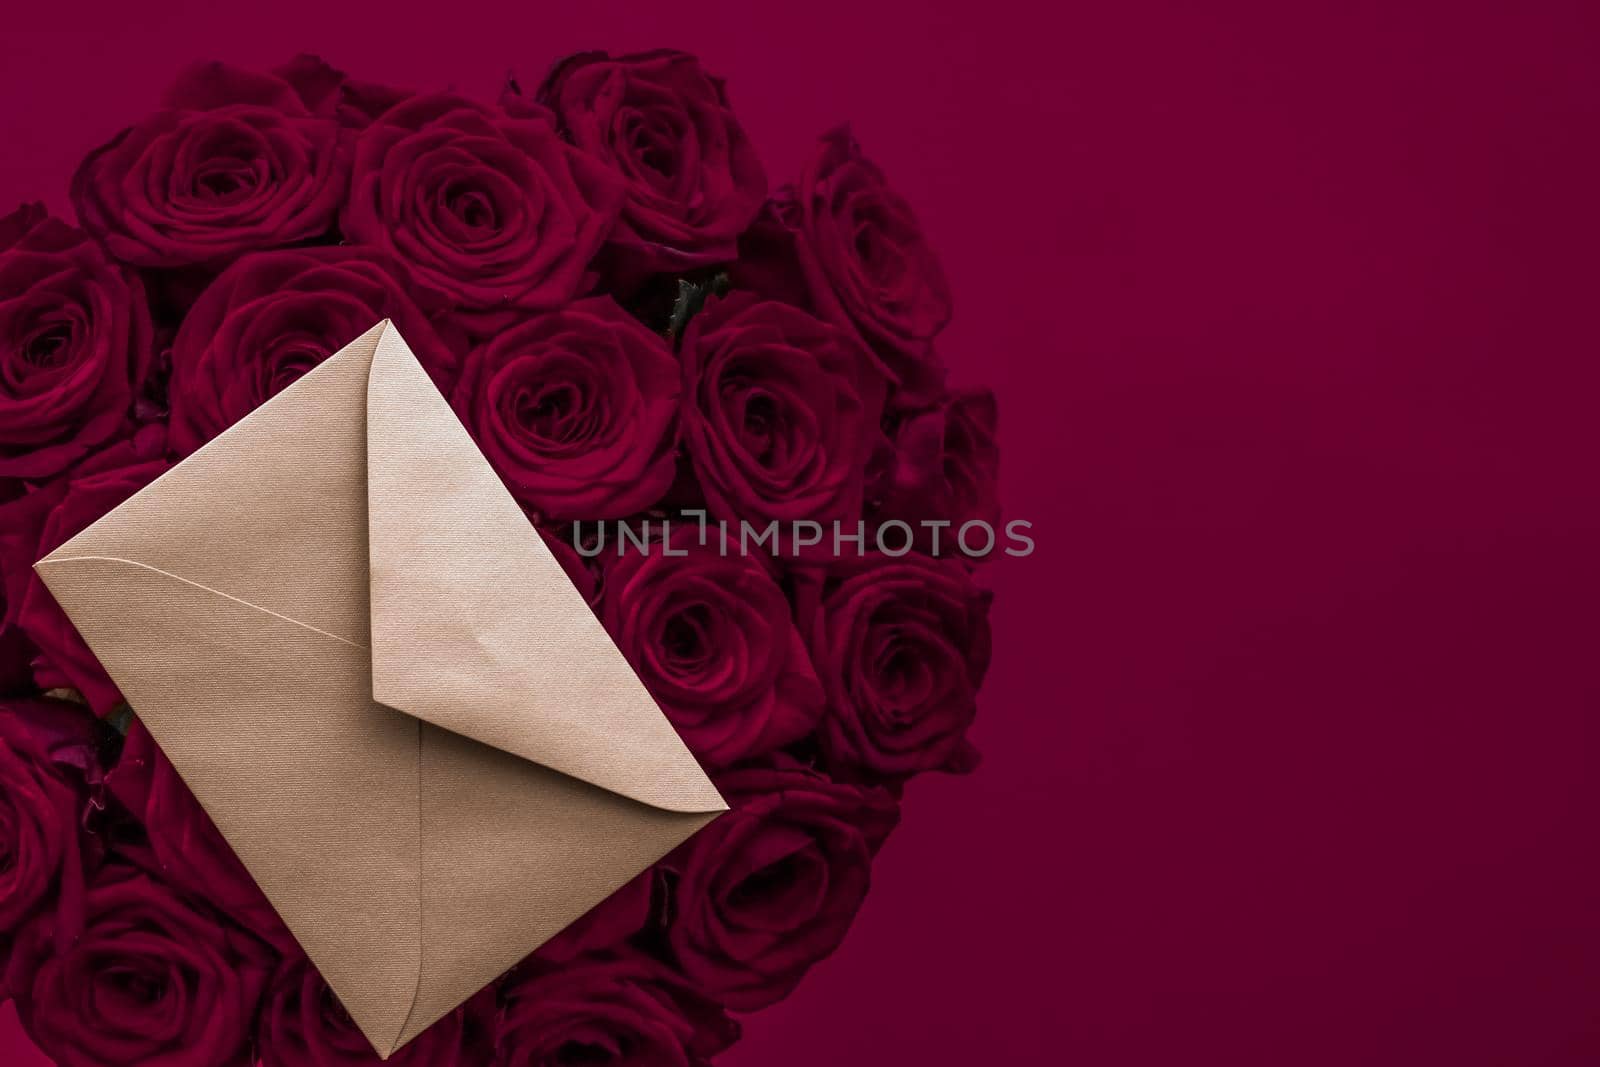 Love letter and flowers delivery on Valentines Day, luxury bouquet of roses and card on maroon background for romantic holiday design by Anneleven